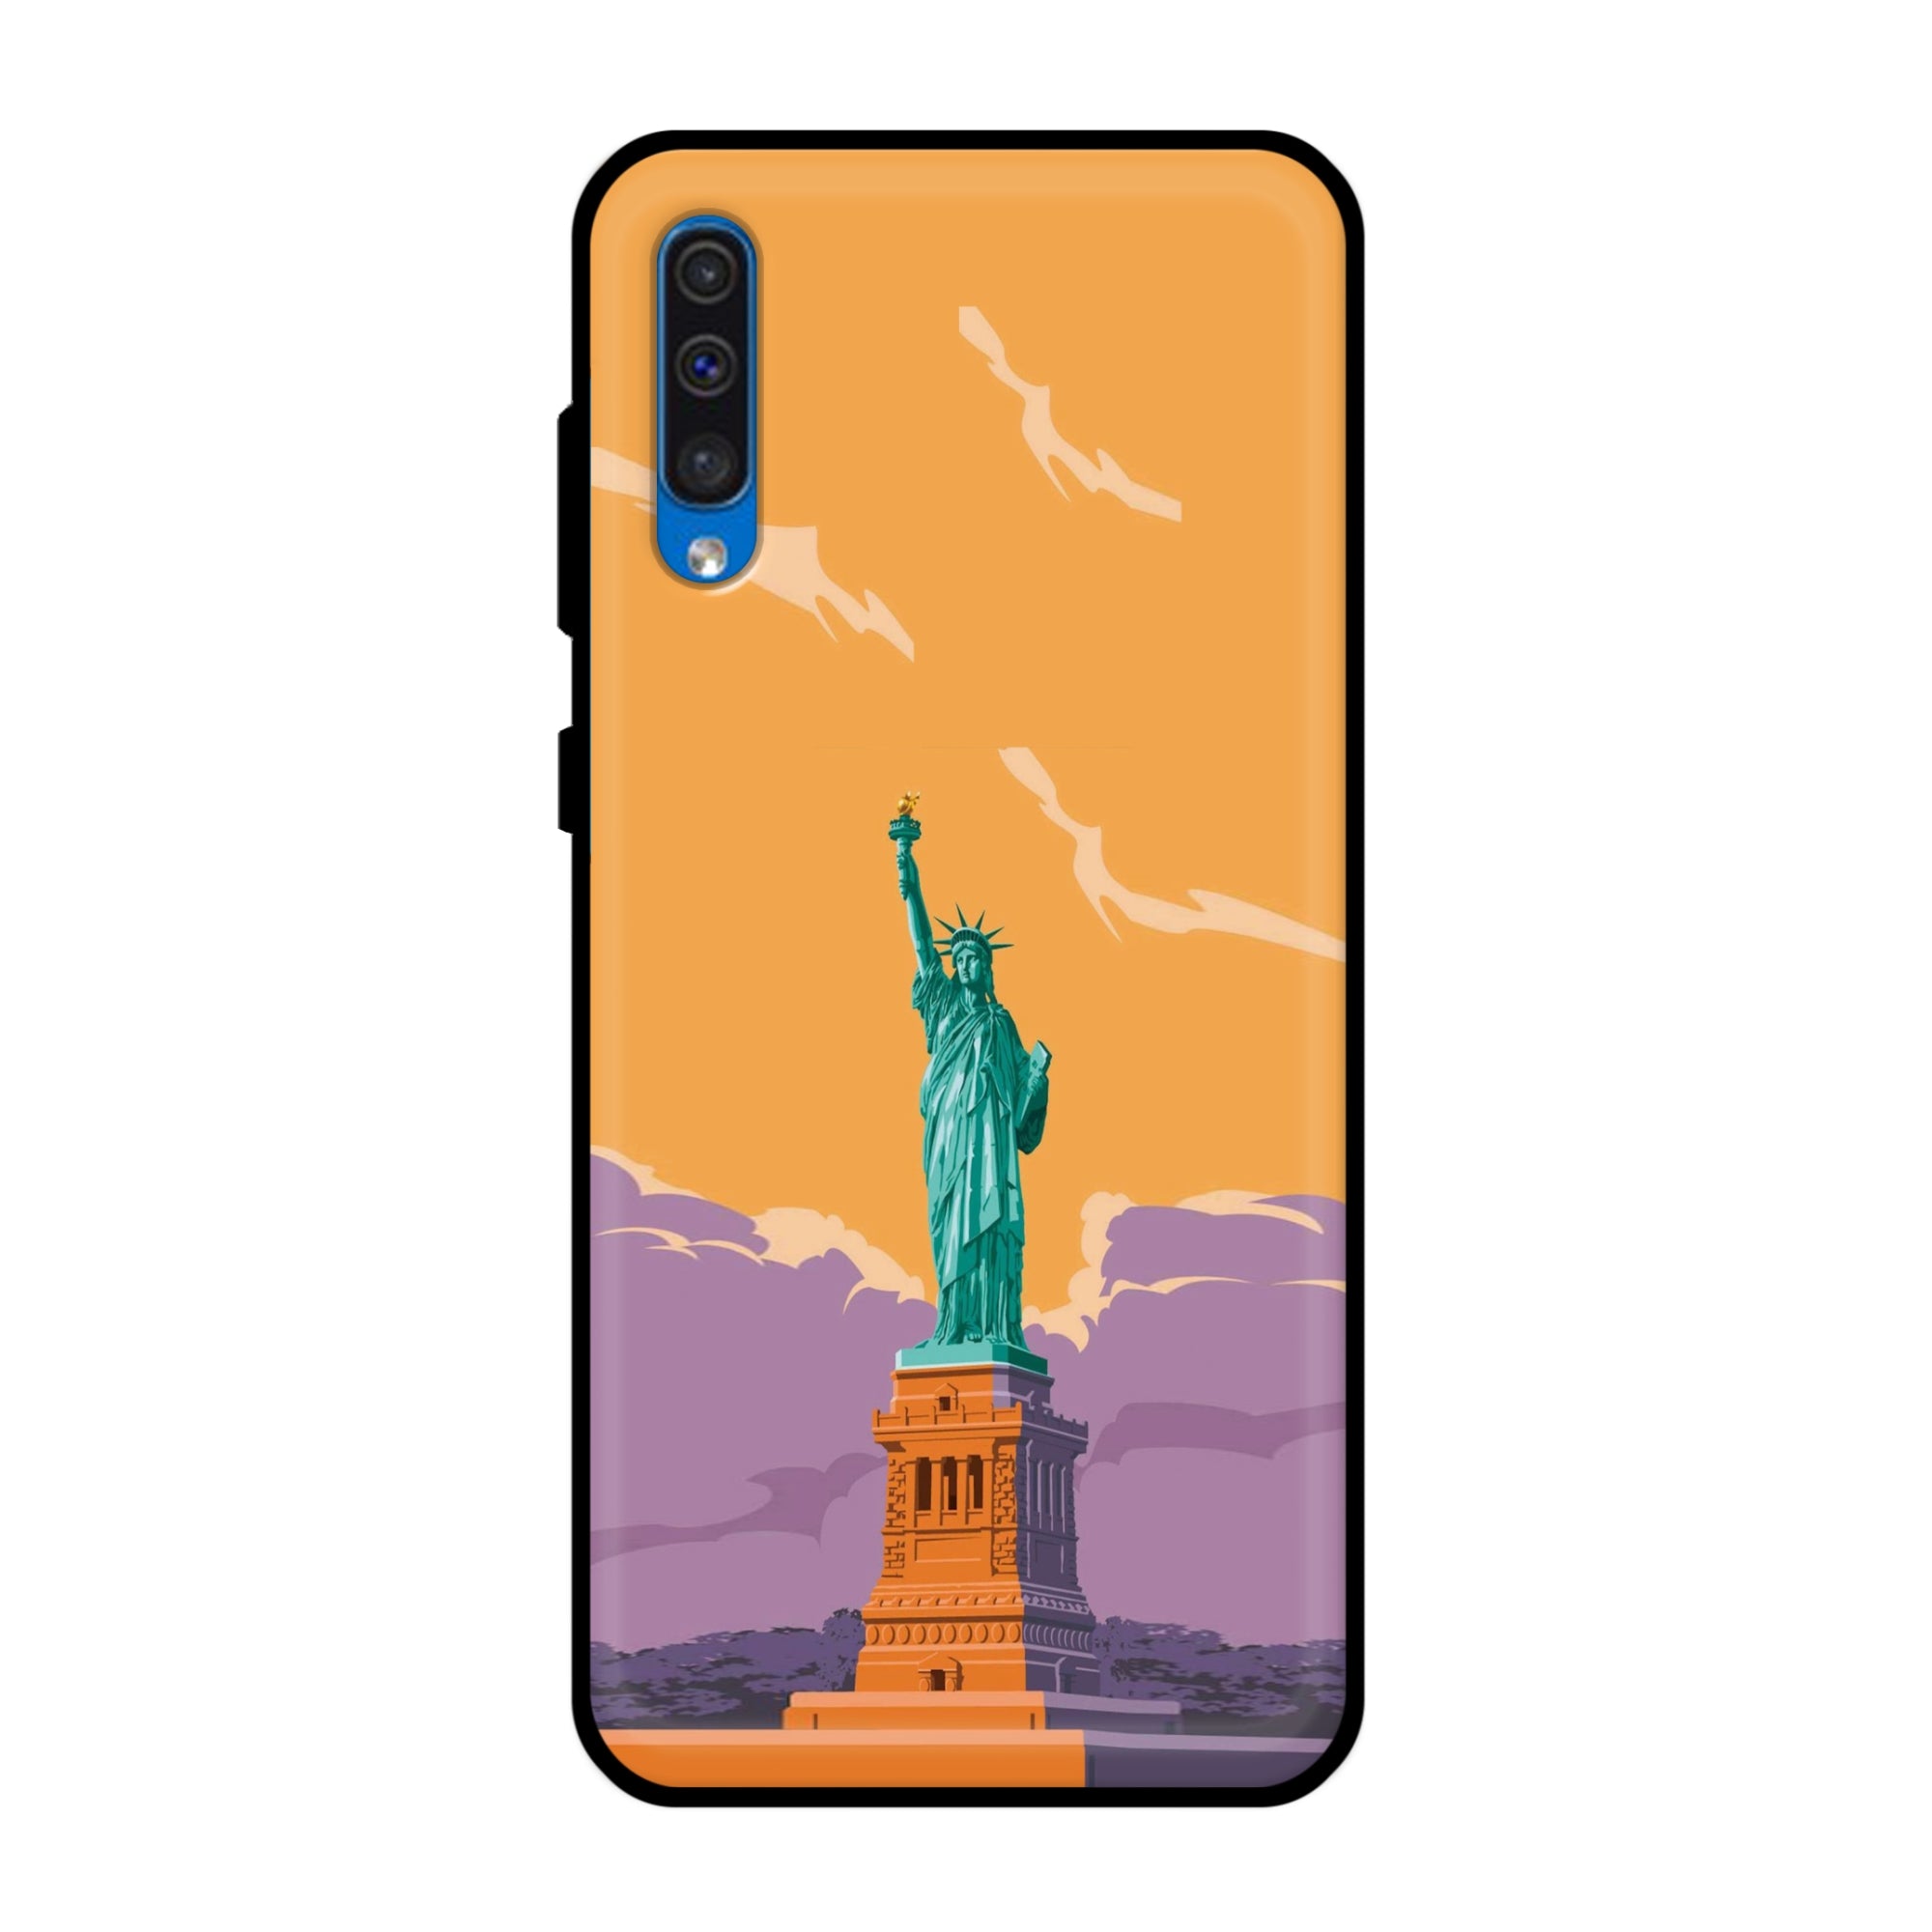 Buy Statue Of Liberty Metal-Silicon Back Mobile Phone Case/Cover For Samsung Galaxy A50 / A50s / A30s Online